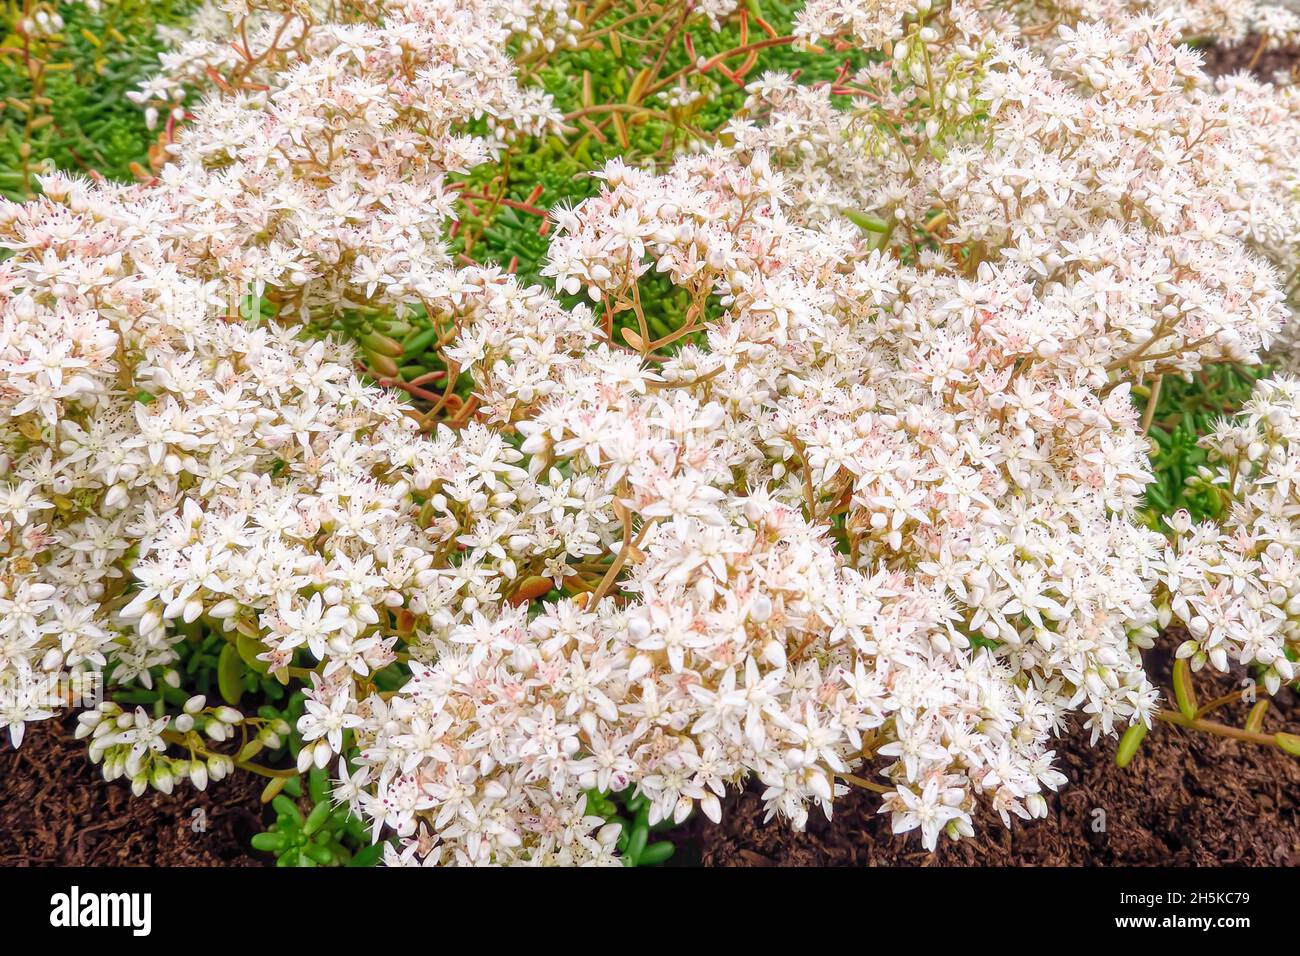 White Stonecrop (Sedum album L.)  A succulent with tiny star-like flowers, creeping stems and small fleshy leaves. Stock Photo